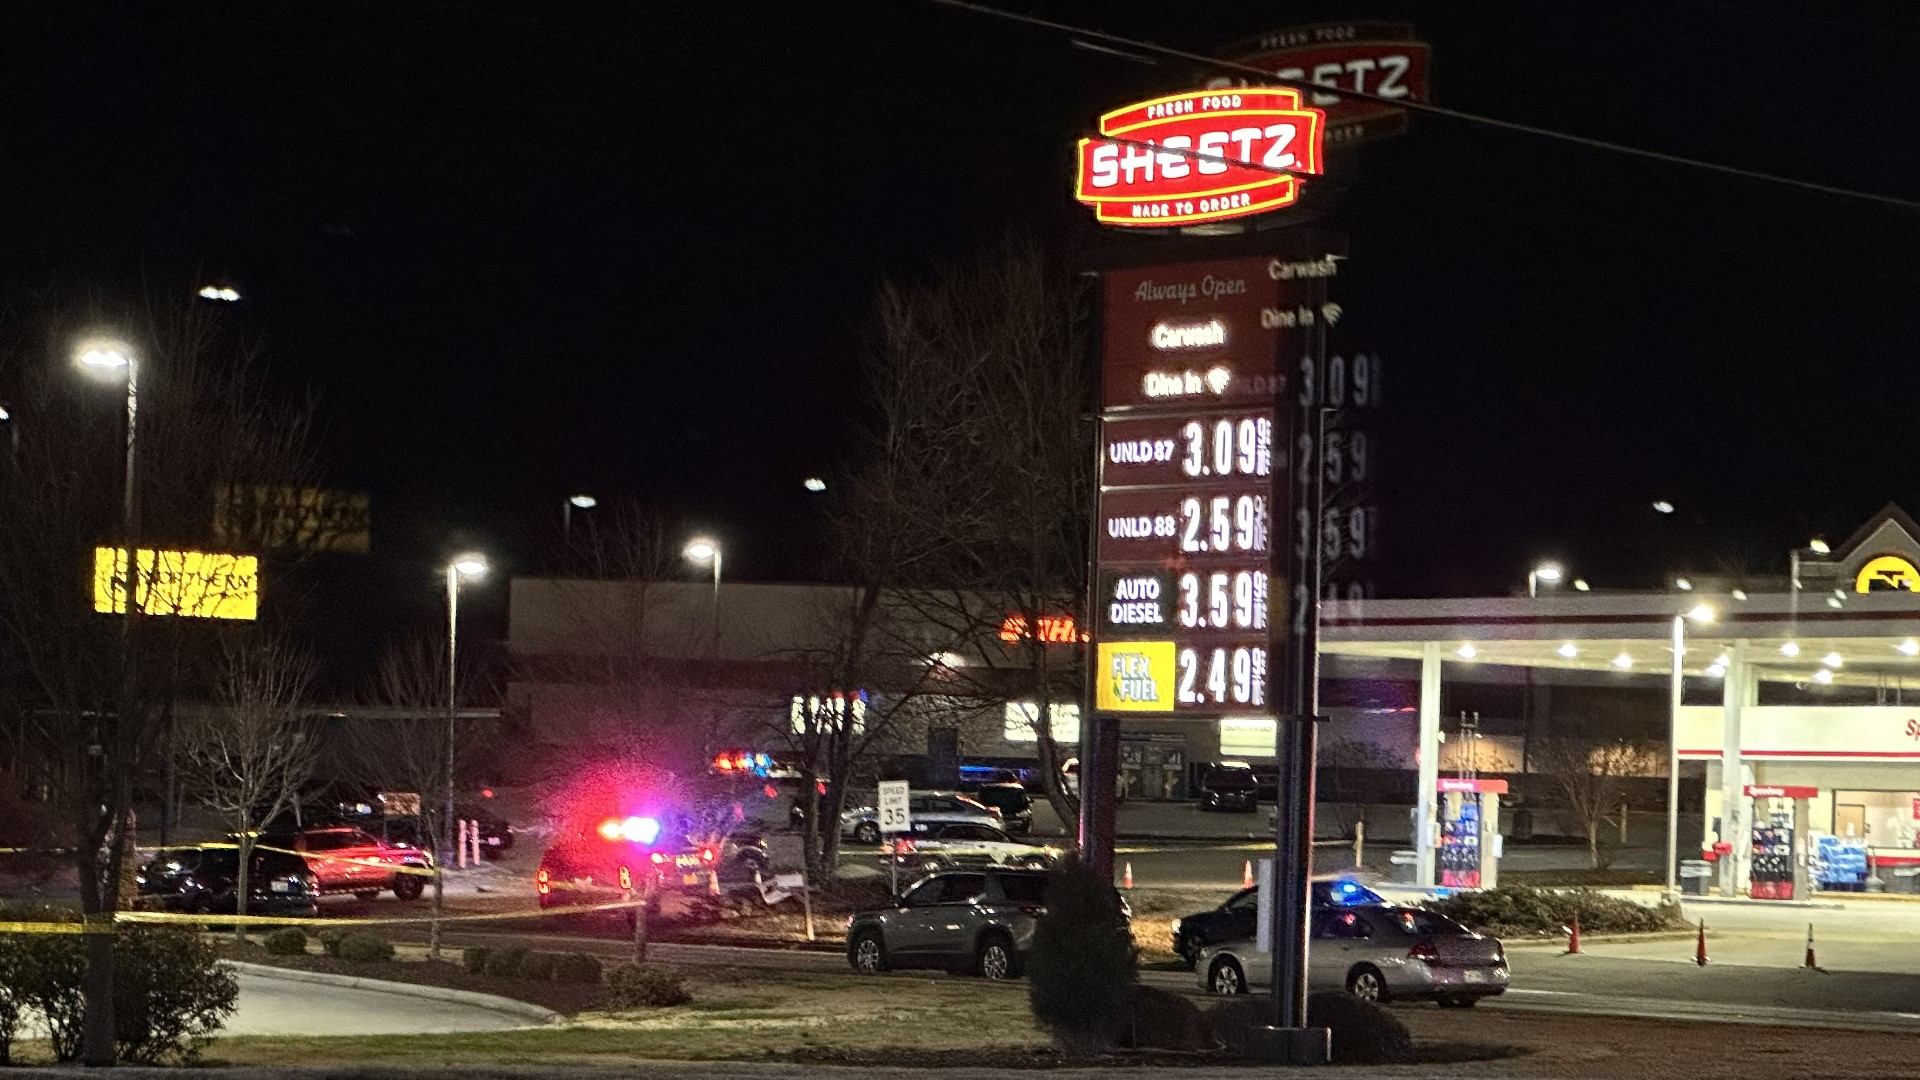 A Greensboro police officer was shot and killed at the Sheetz on Sandy Ridge Road while trying to stop a crime in progress.